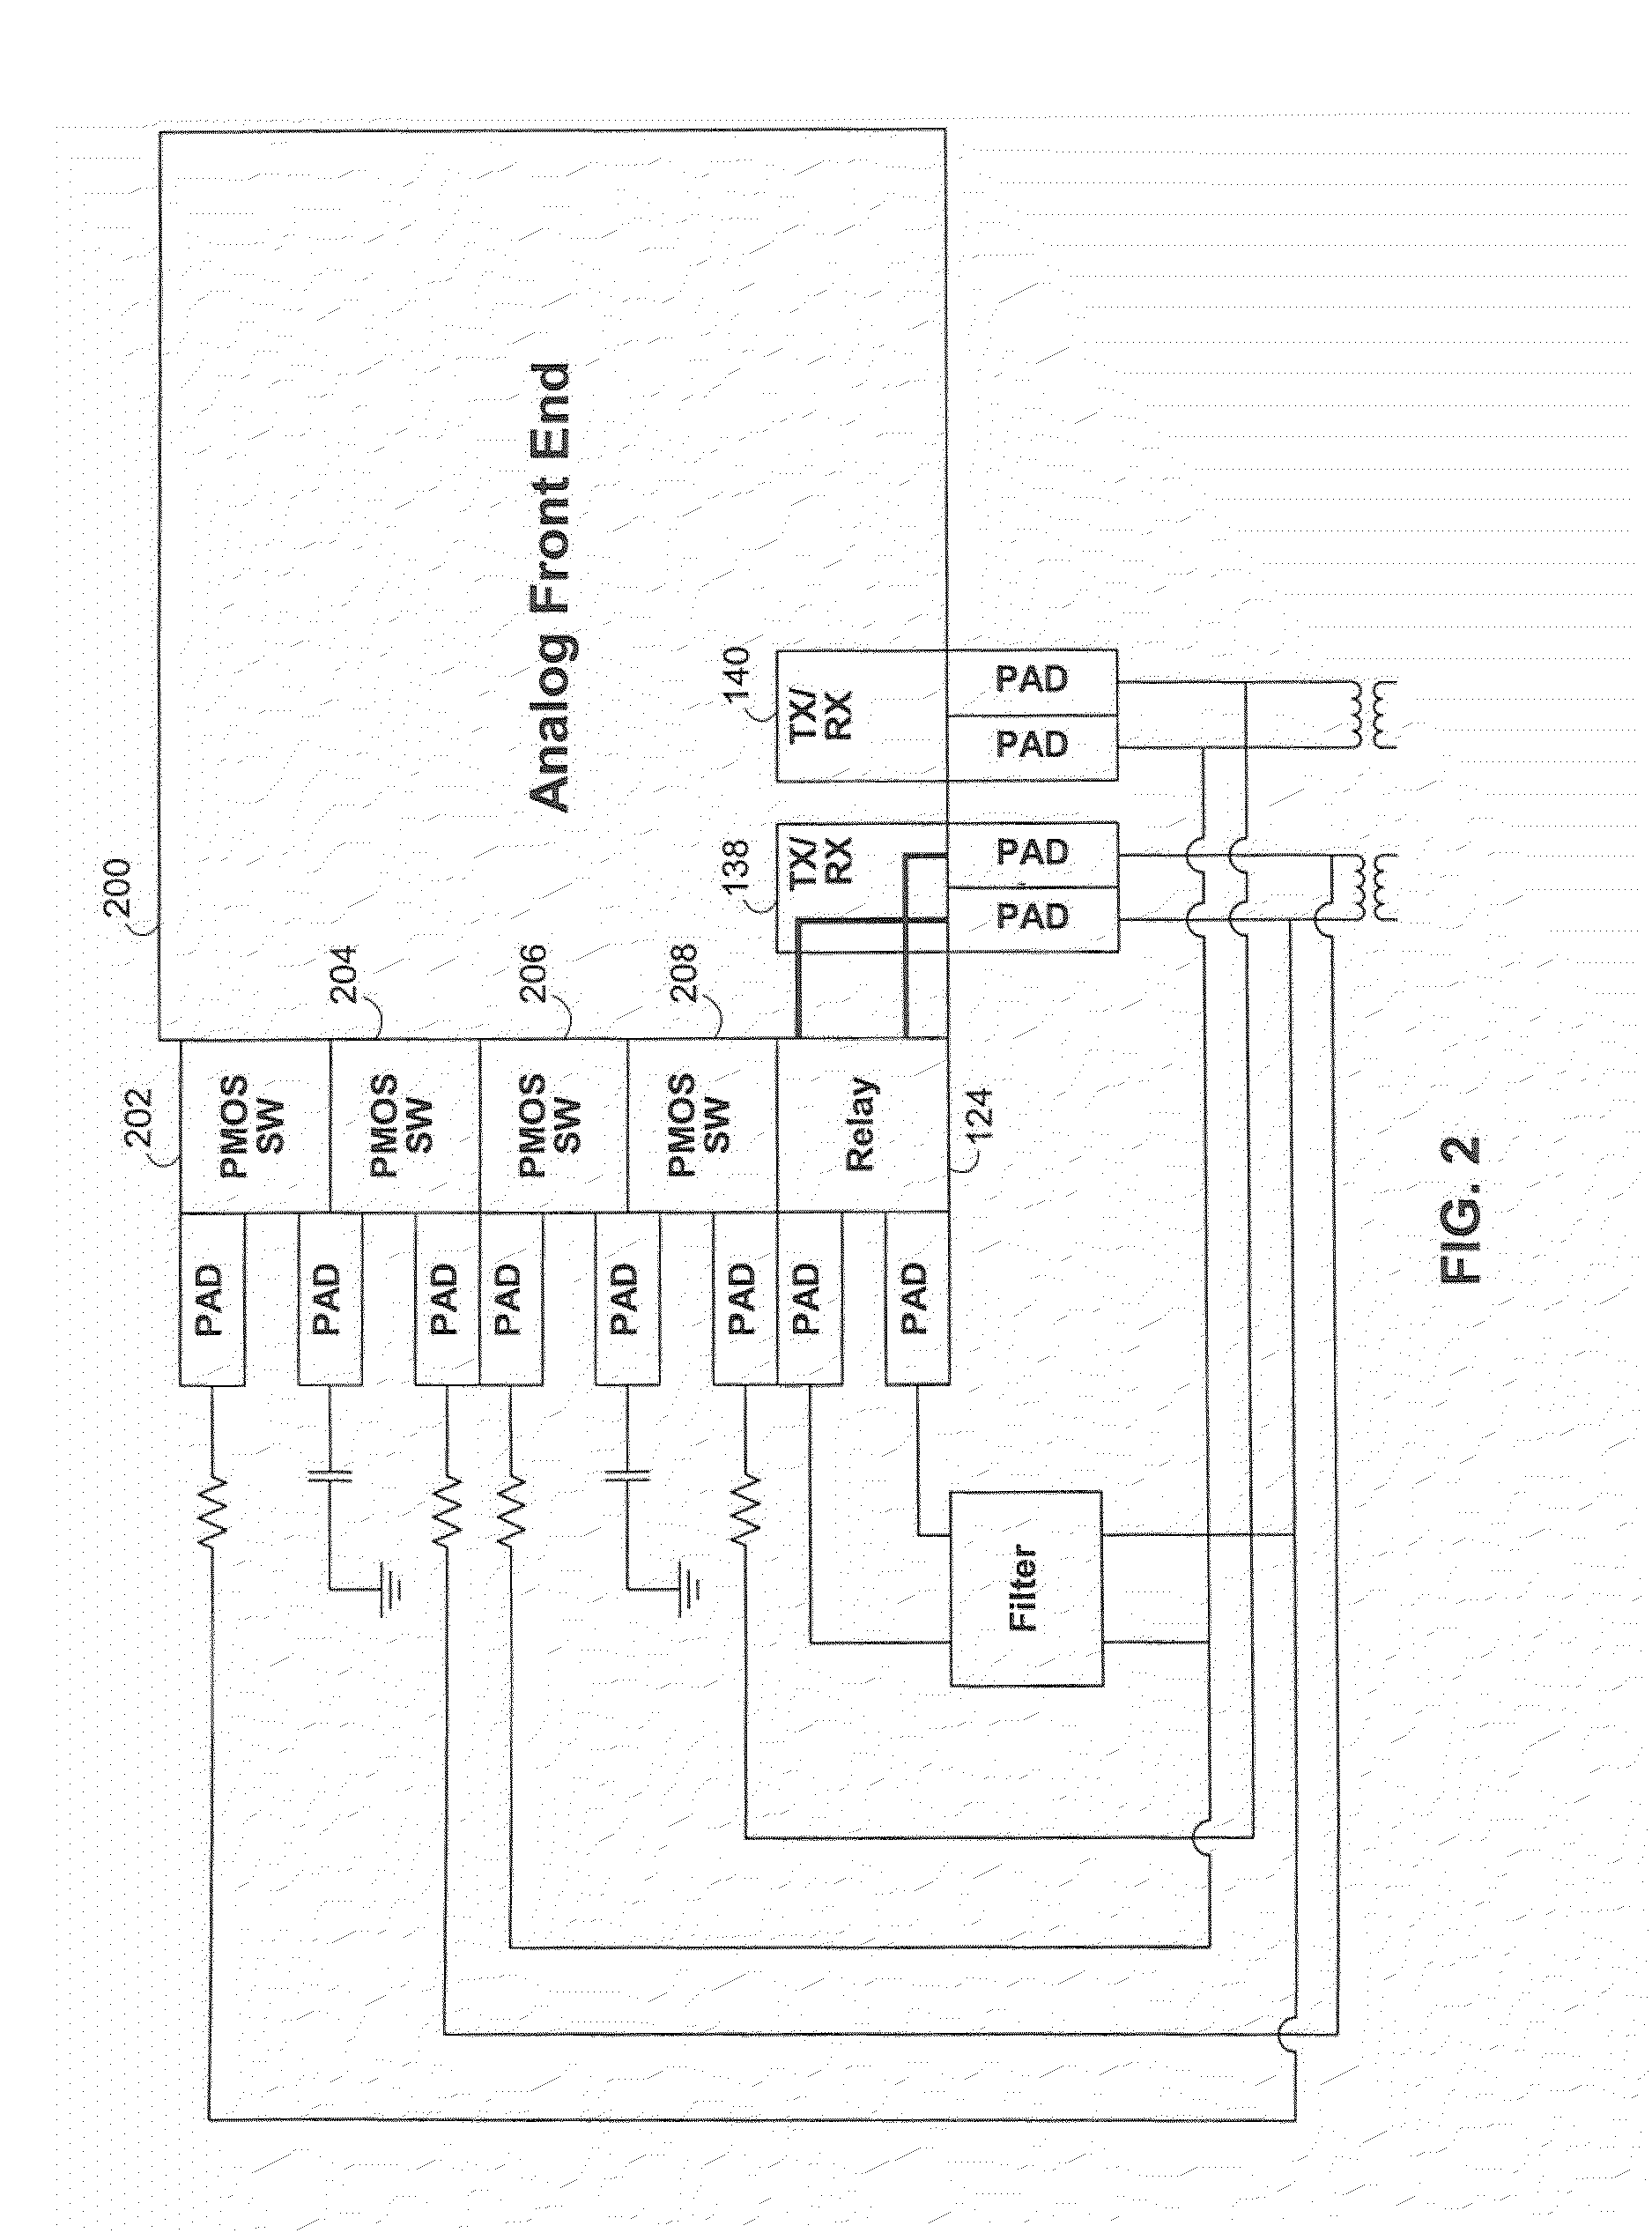 Relay circuitry and switching circuitry for power-over-network devices